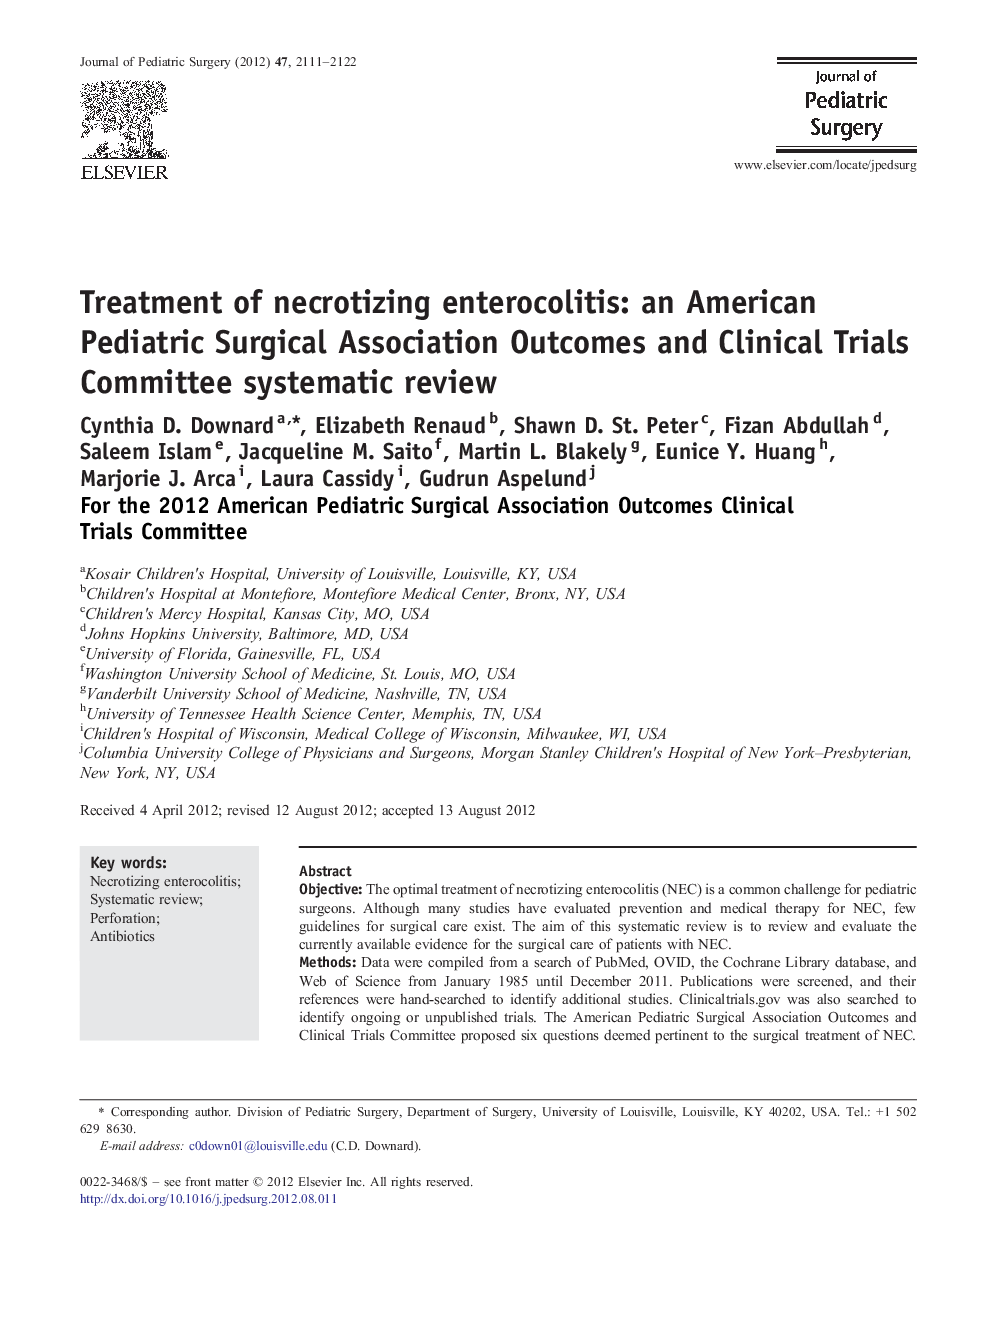 Treatment of necrotizing enterocolitis: an American Pediatric Surgical Association Outcomes and Clinical Trials Committee systematic review